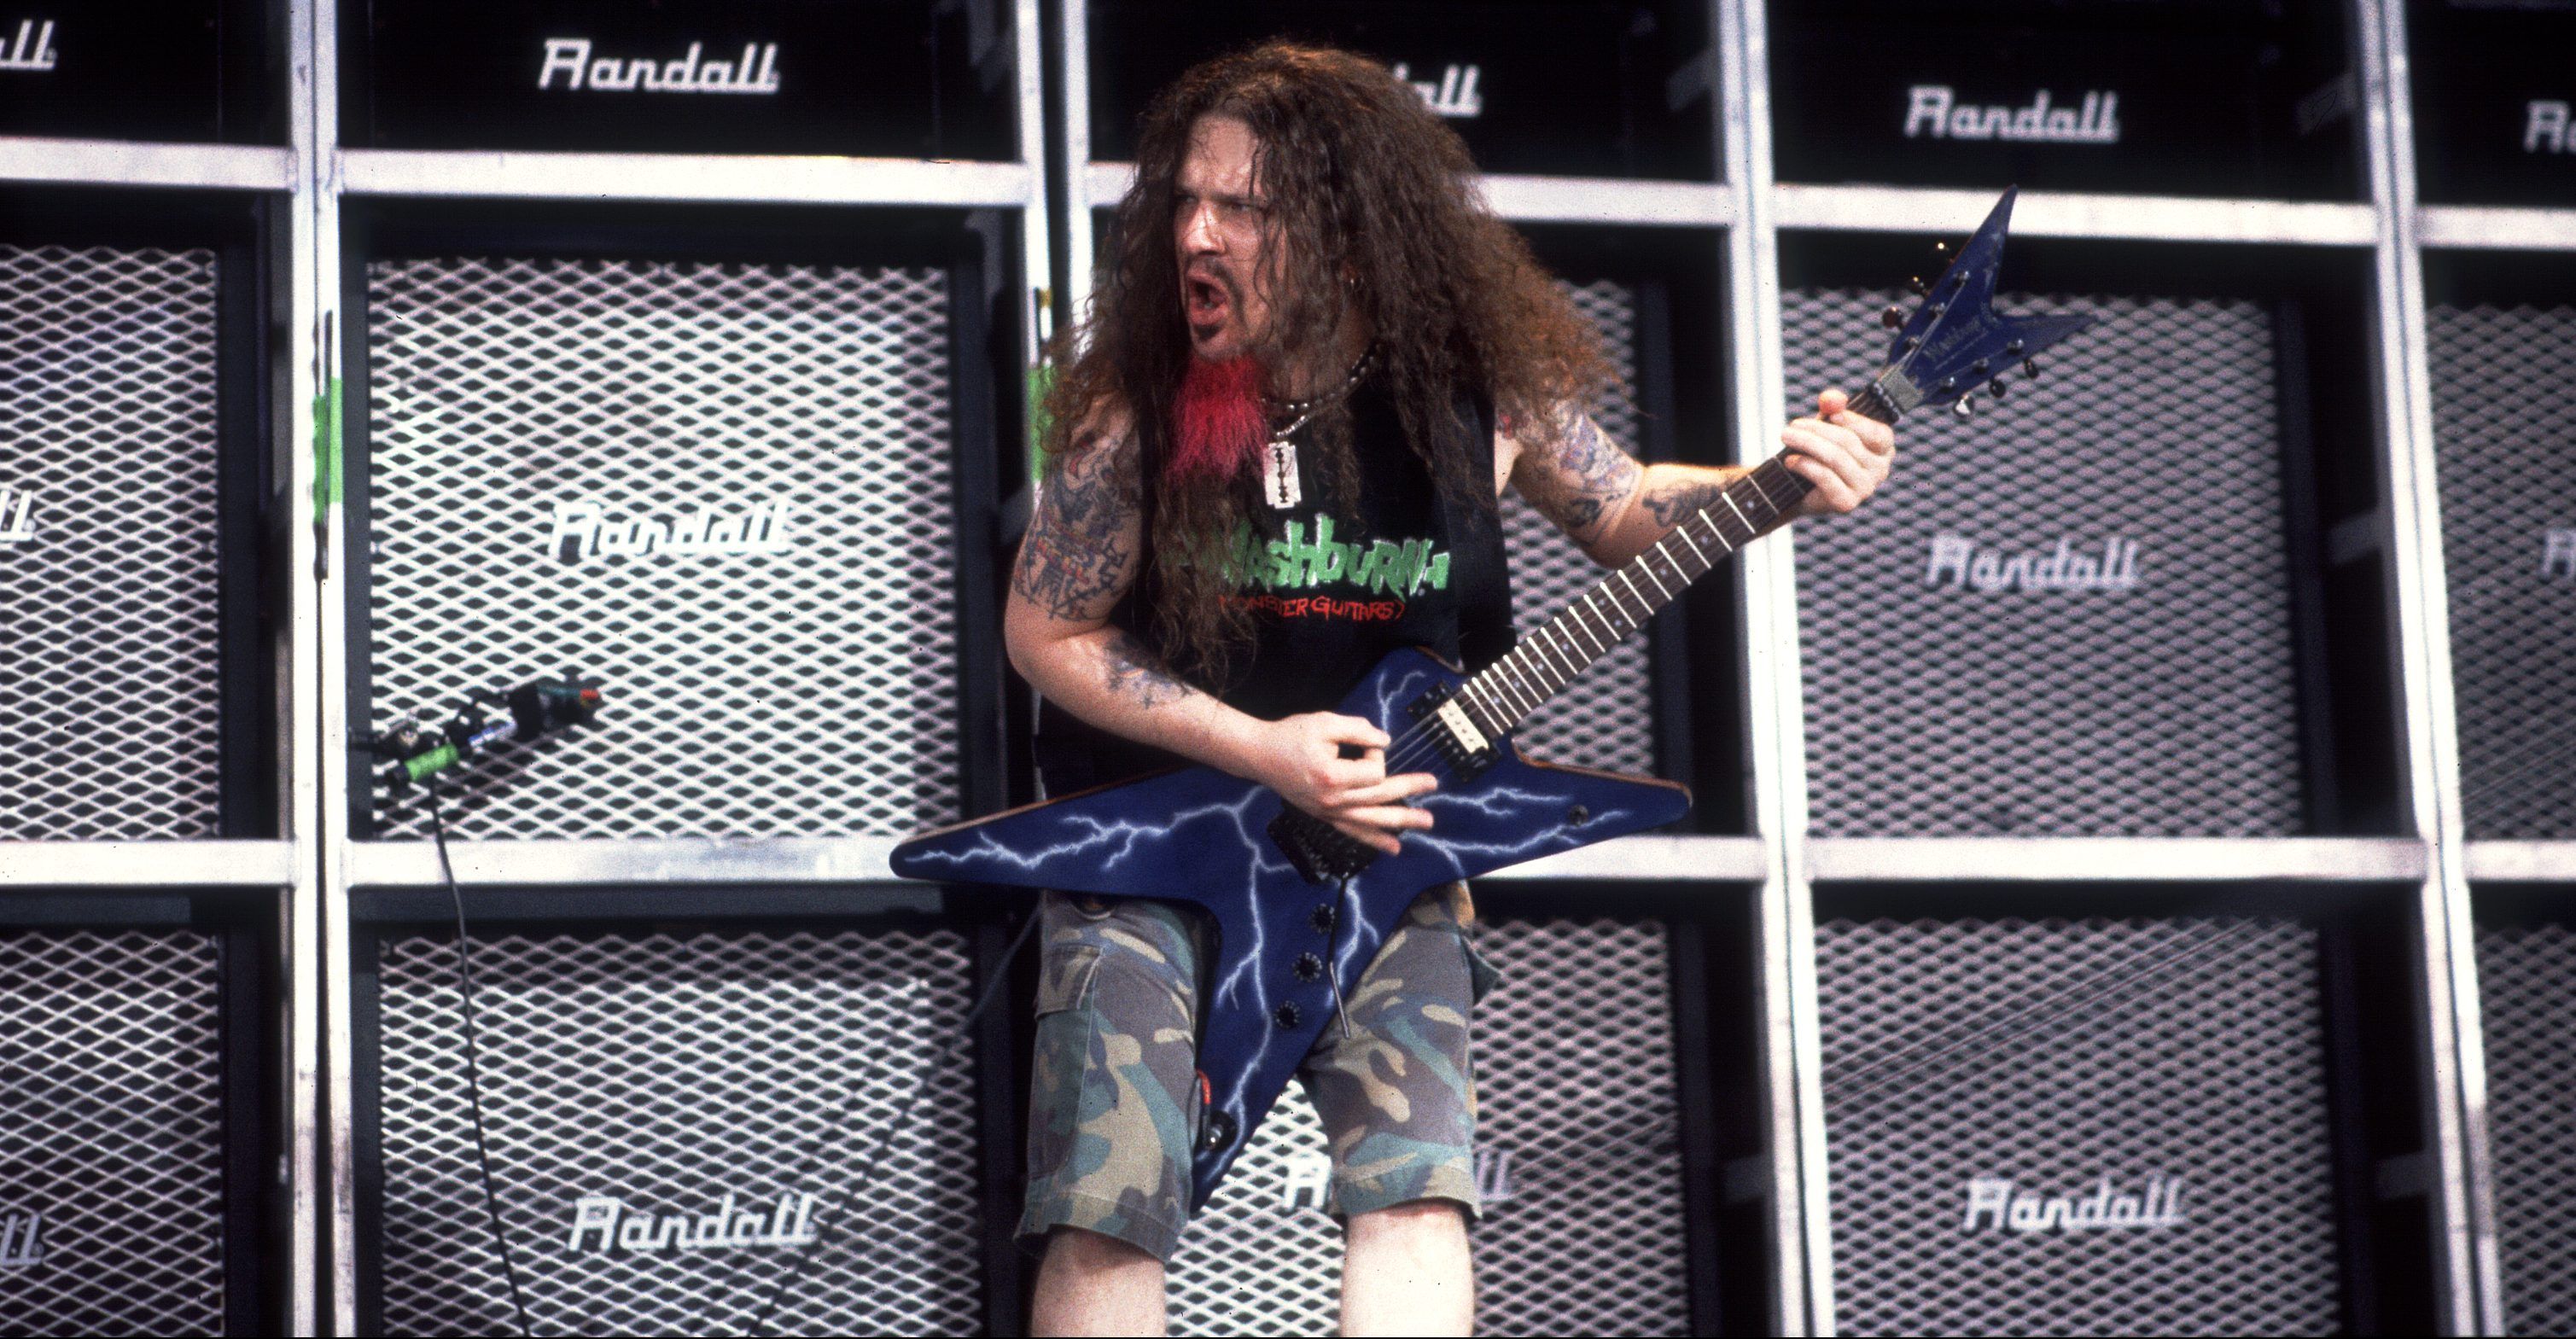 American Rock musician Dimebag Darrell (born Darrell Abbott, 1966 - 2004), of the group Pantera, plays guitar as he performs onstage at the World Music Theater, Tinley Park, Illinois, August 4, 2000. (Photo by Paul Natkin/Getty Images)